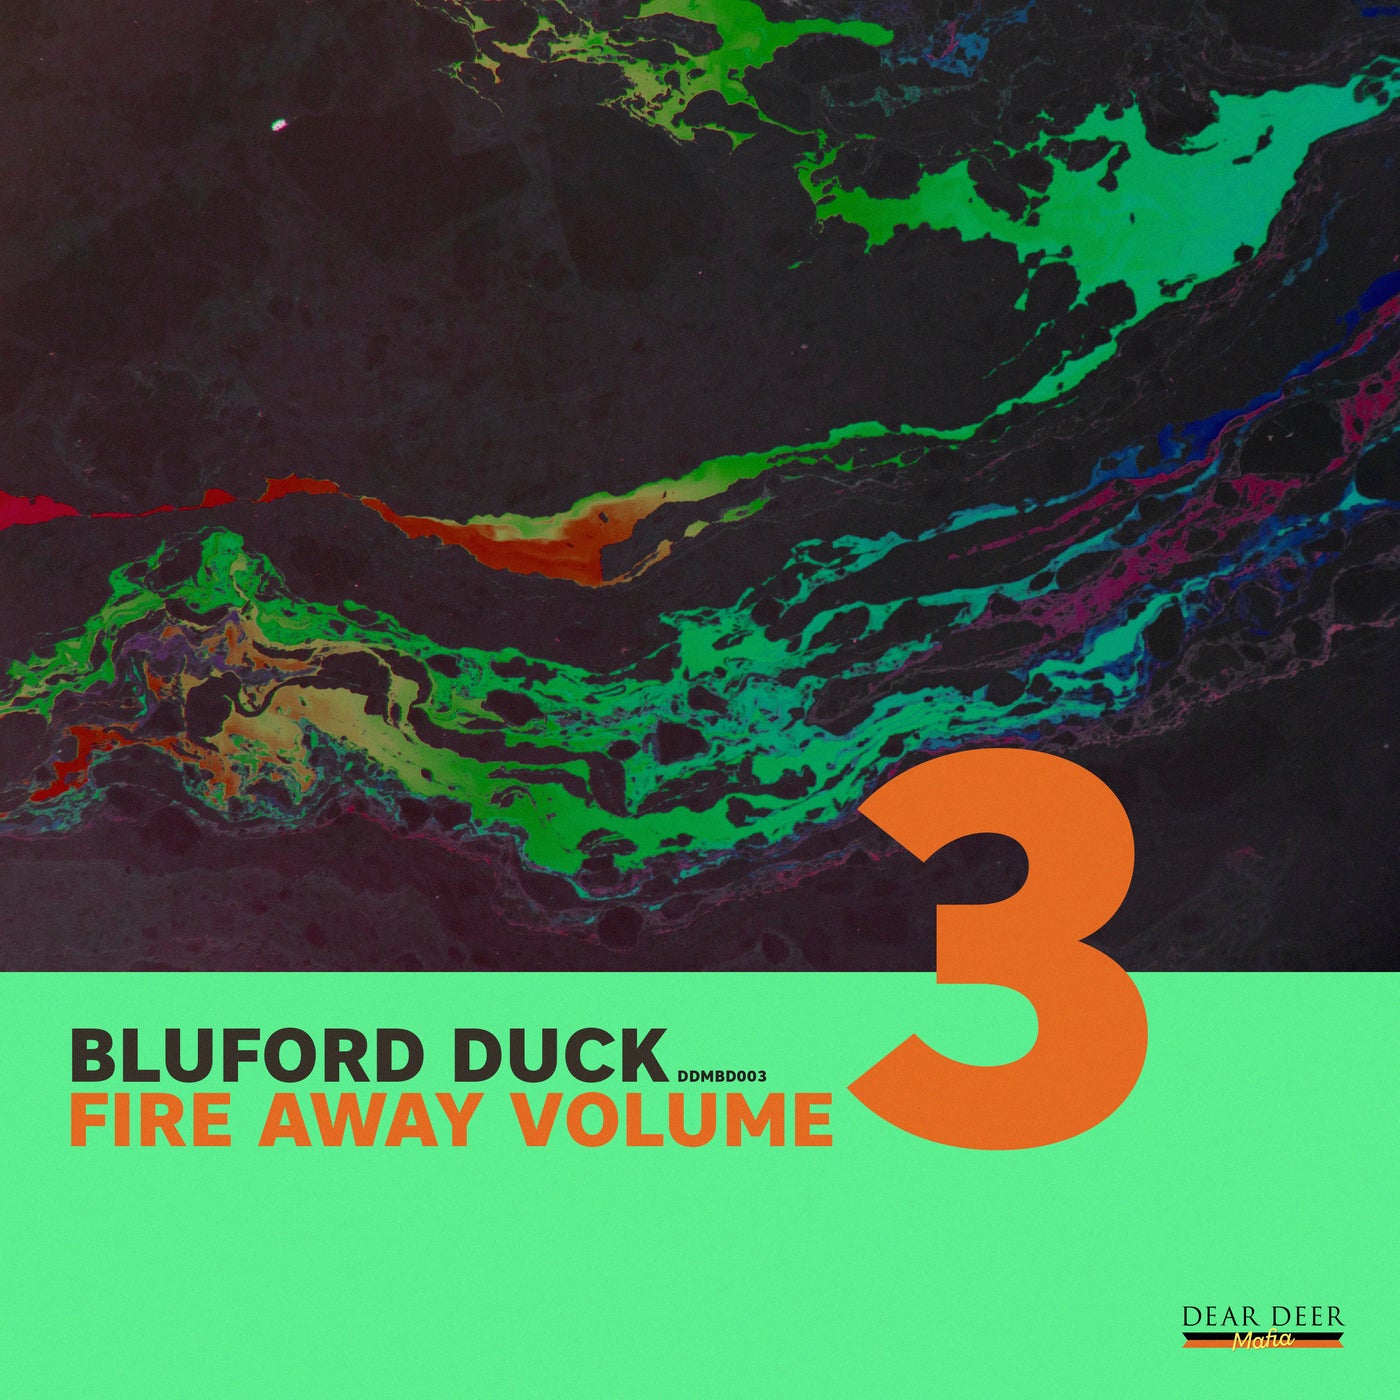 image cover: Bluford Duck - Fire Away, Vol. 3 / DDMBD003